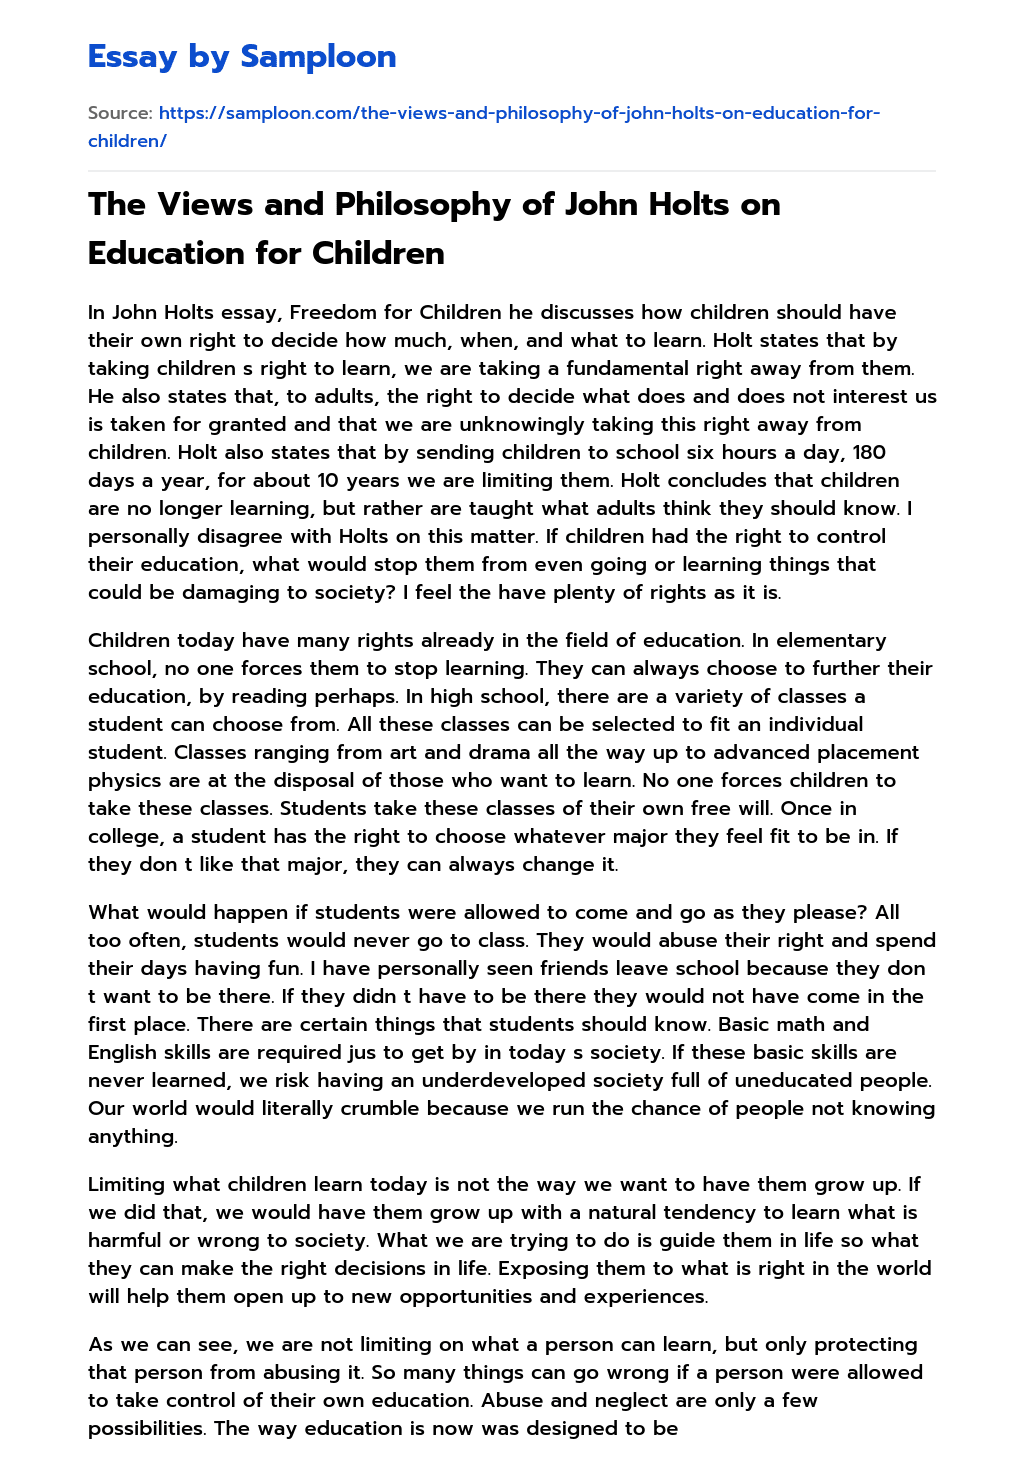 The Views and Philosophy of John Holts on Education for Children essay